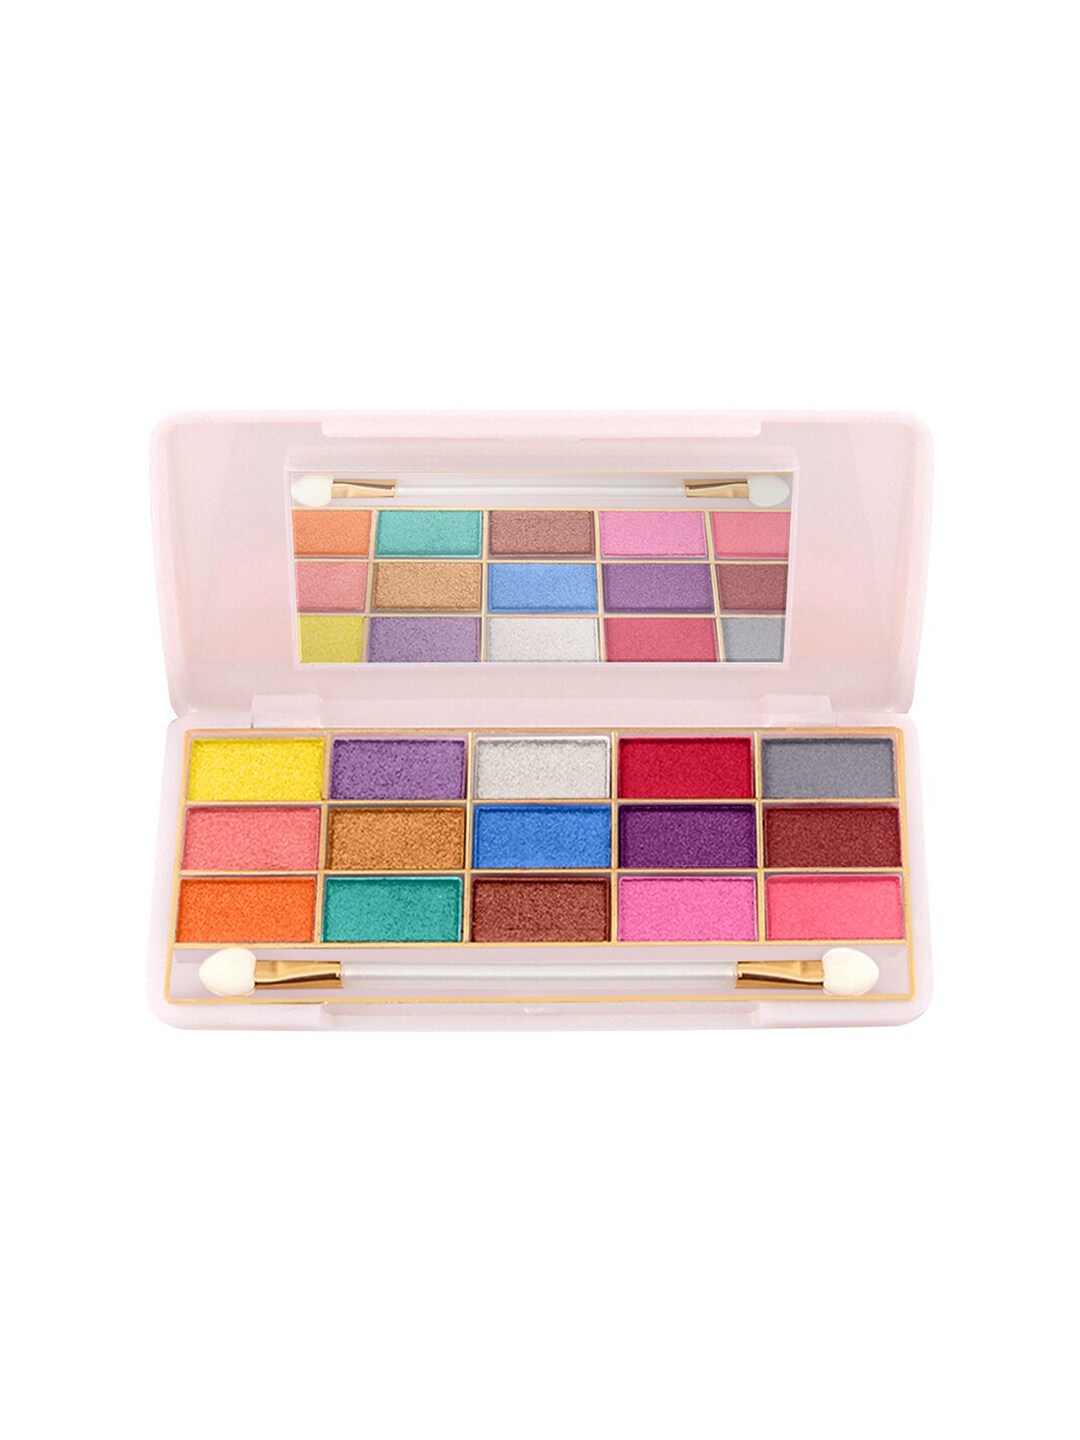 Miss Rose 15 Multi-Color Eyeshadow Palette 7001-068I 01 Price in India